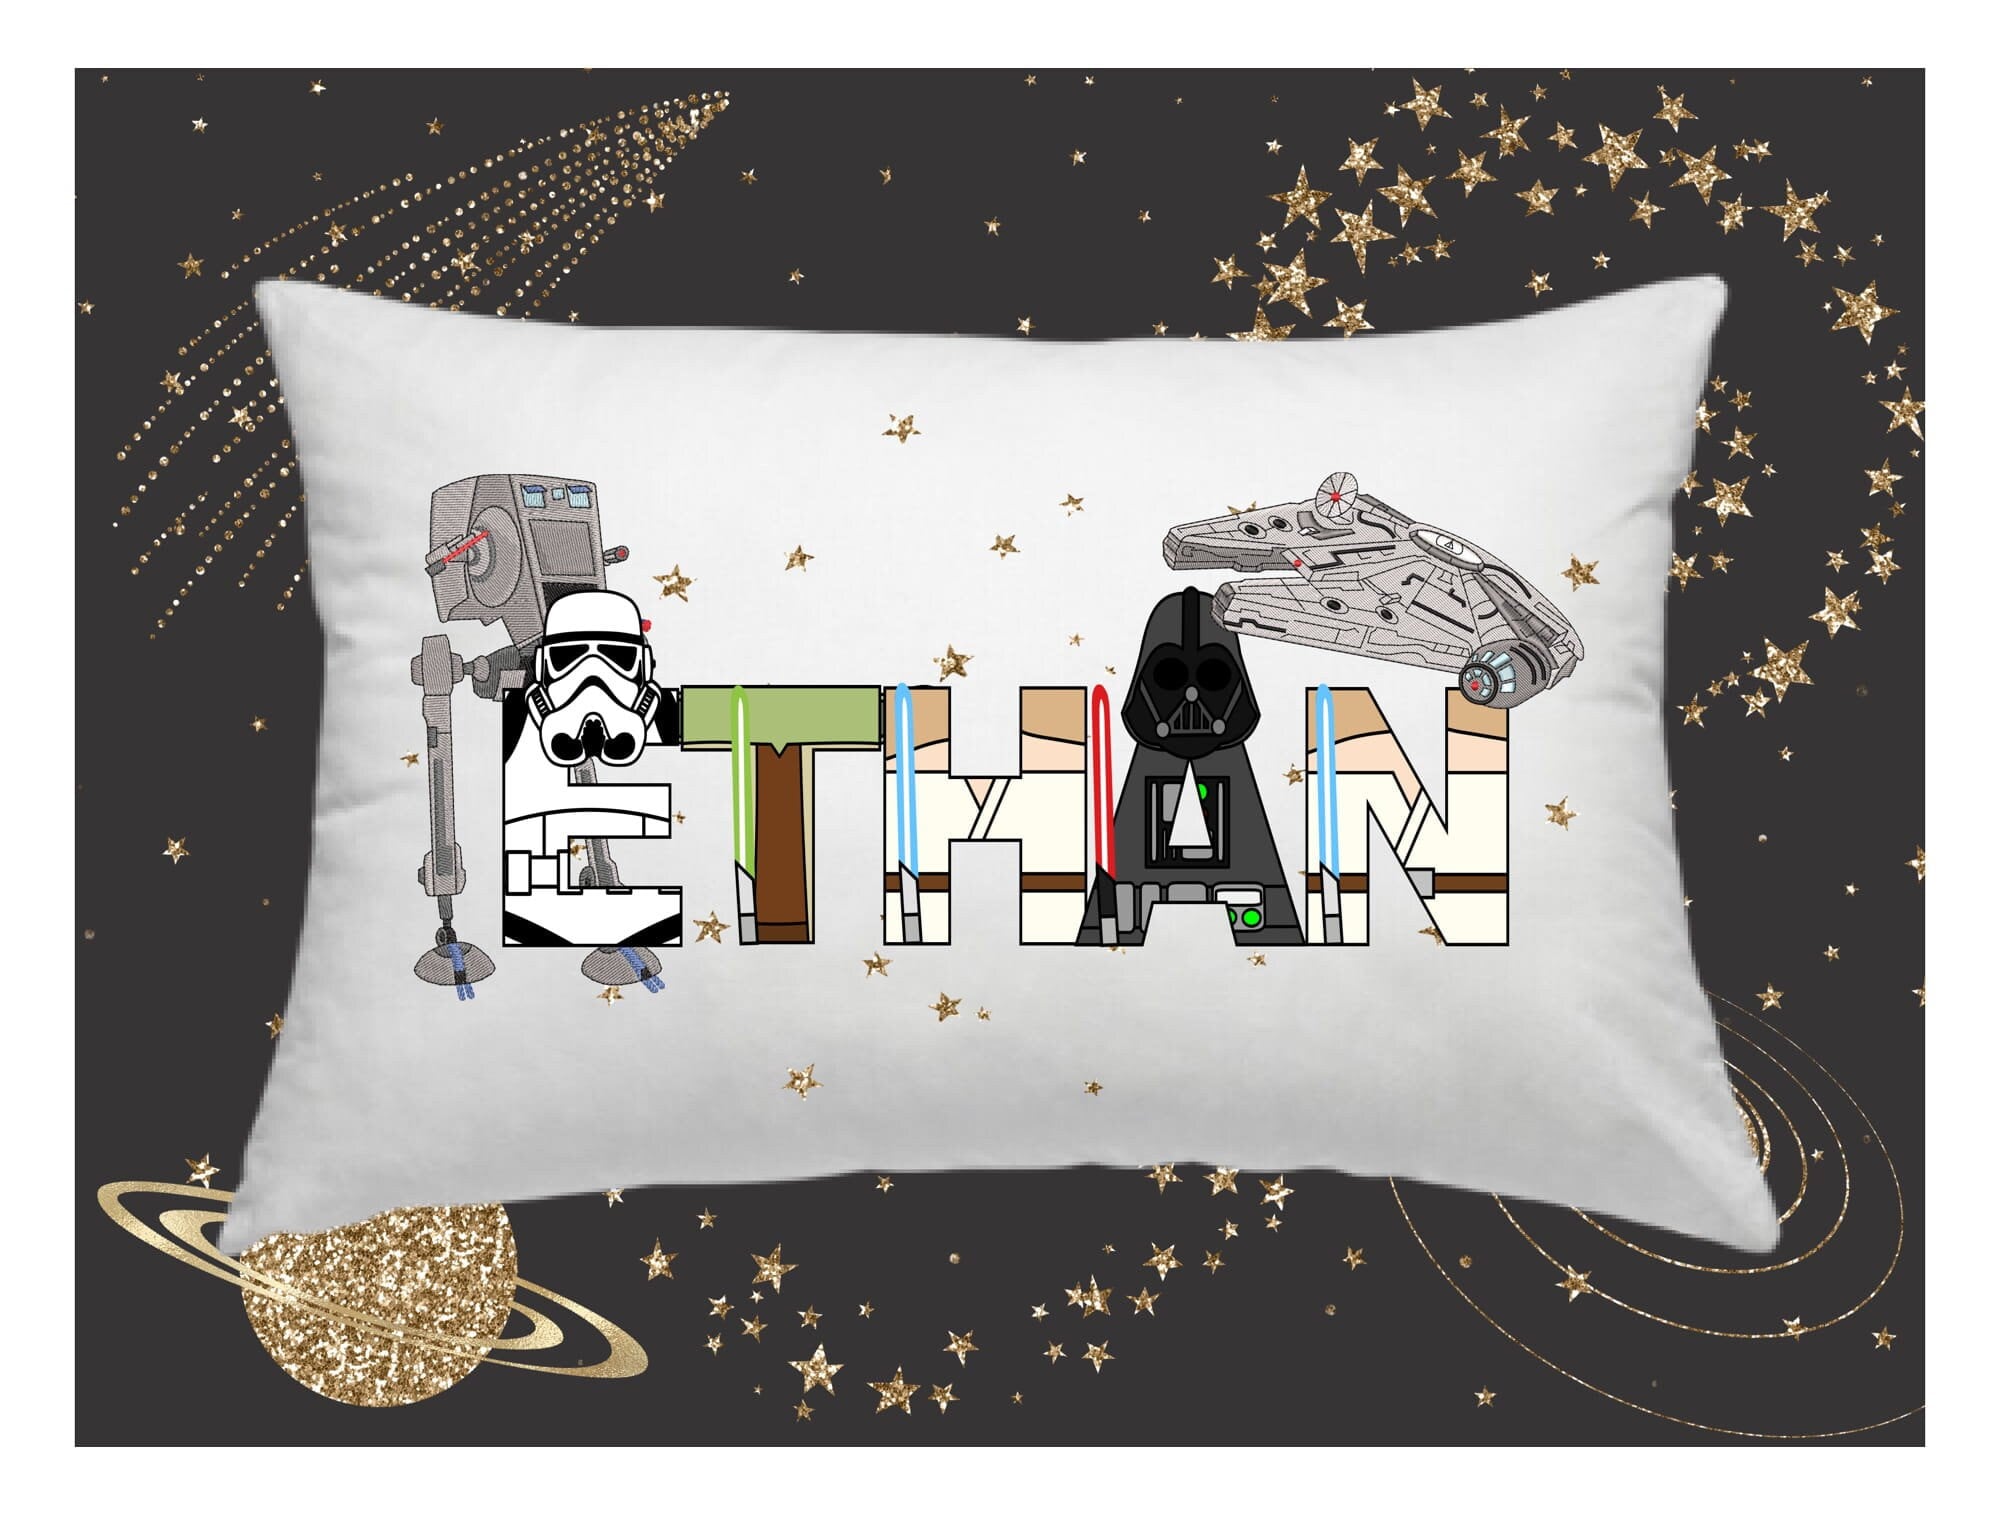 The Handmade Star Wars Pillow Covers